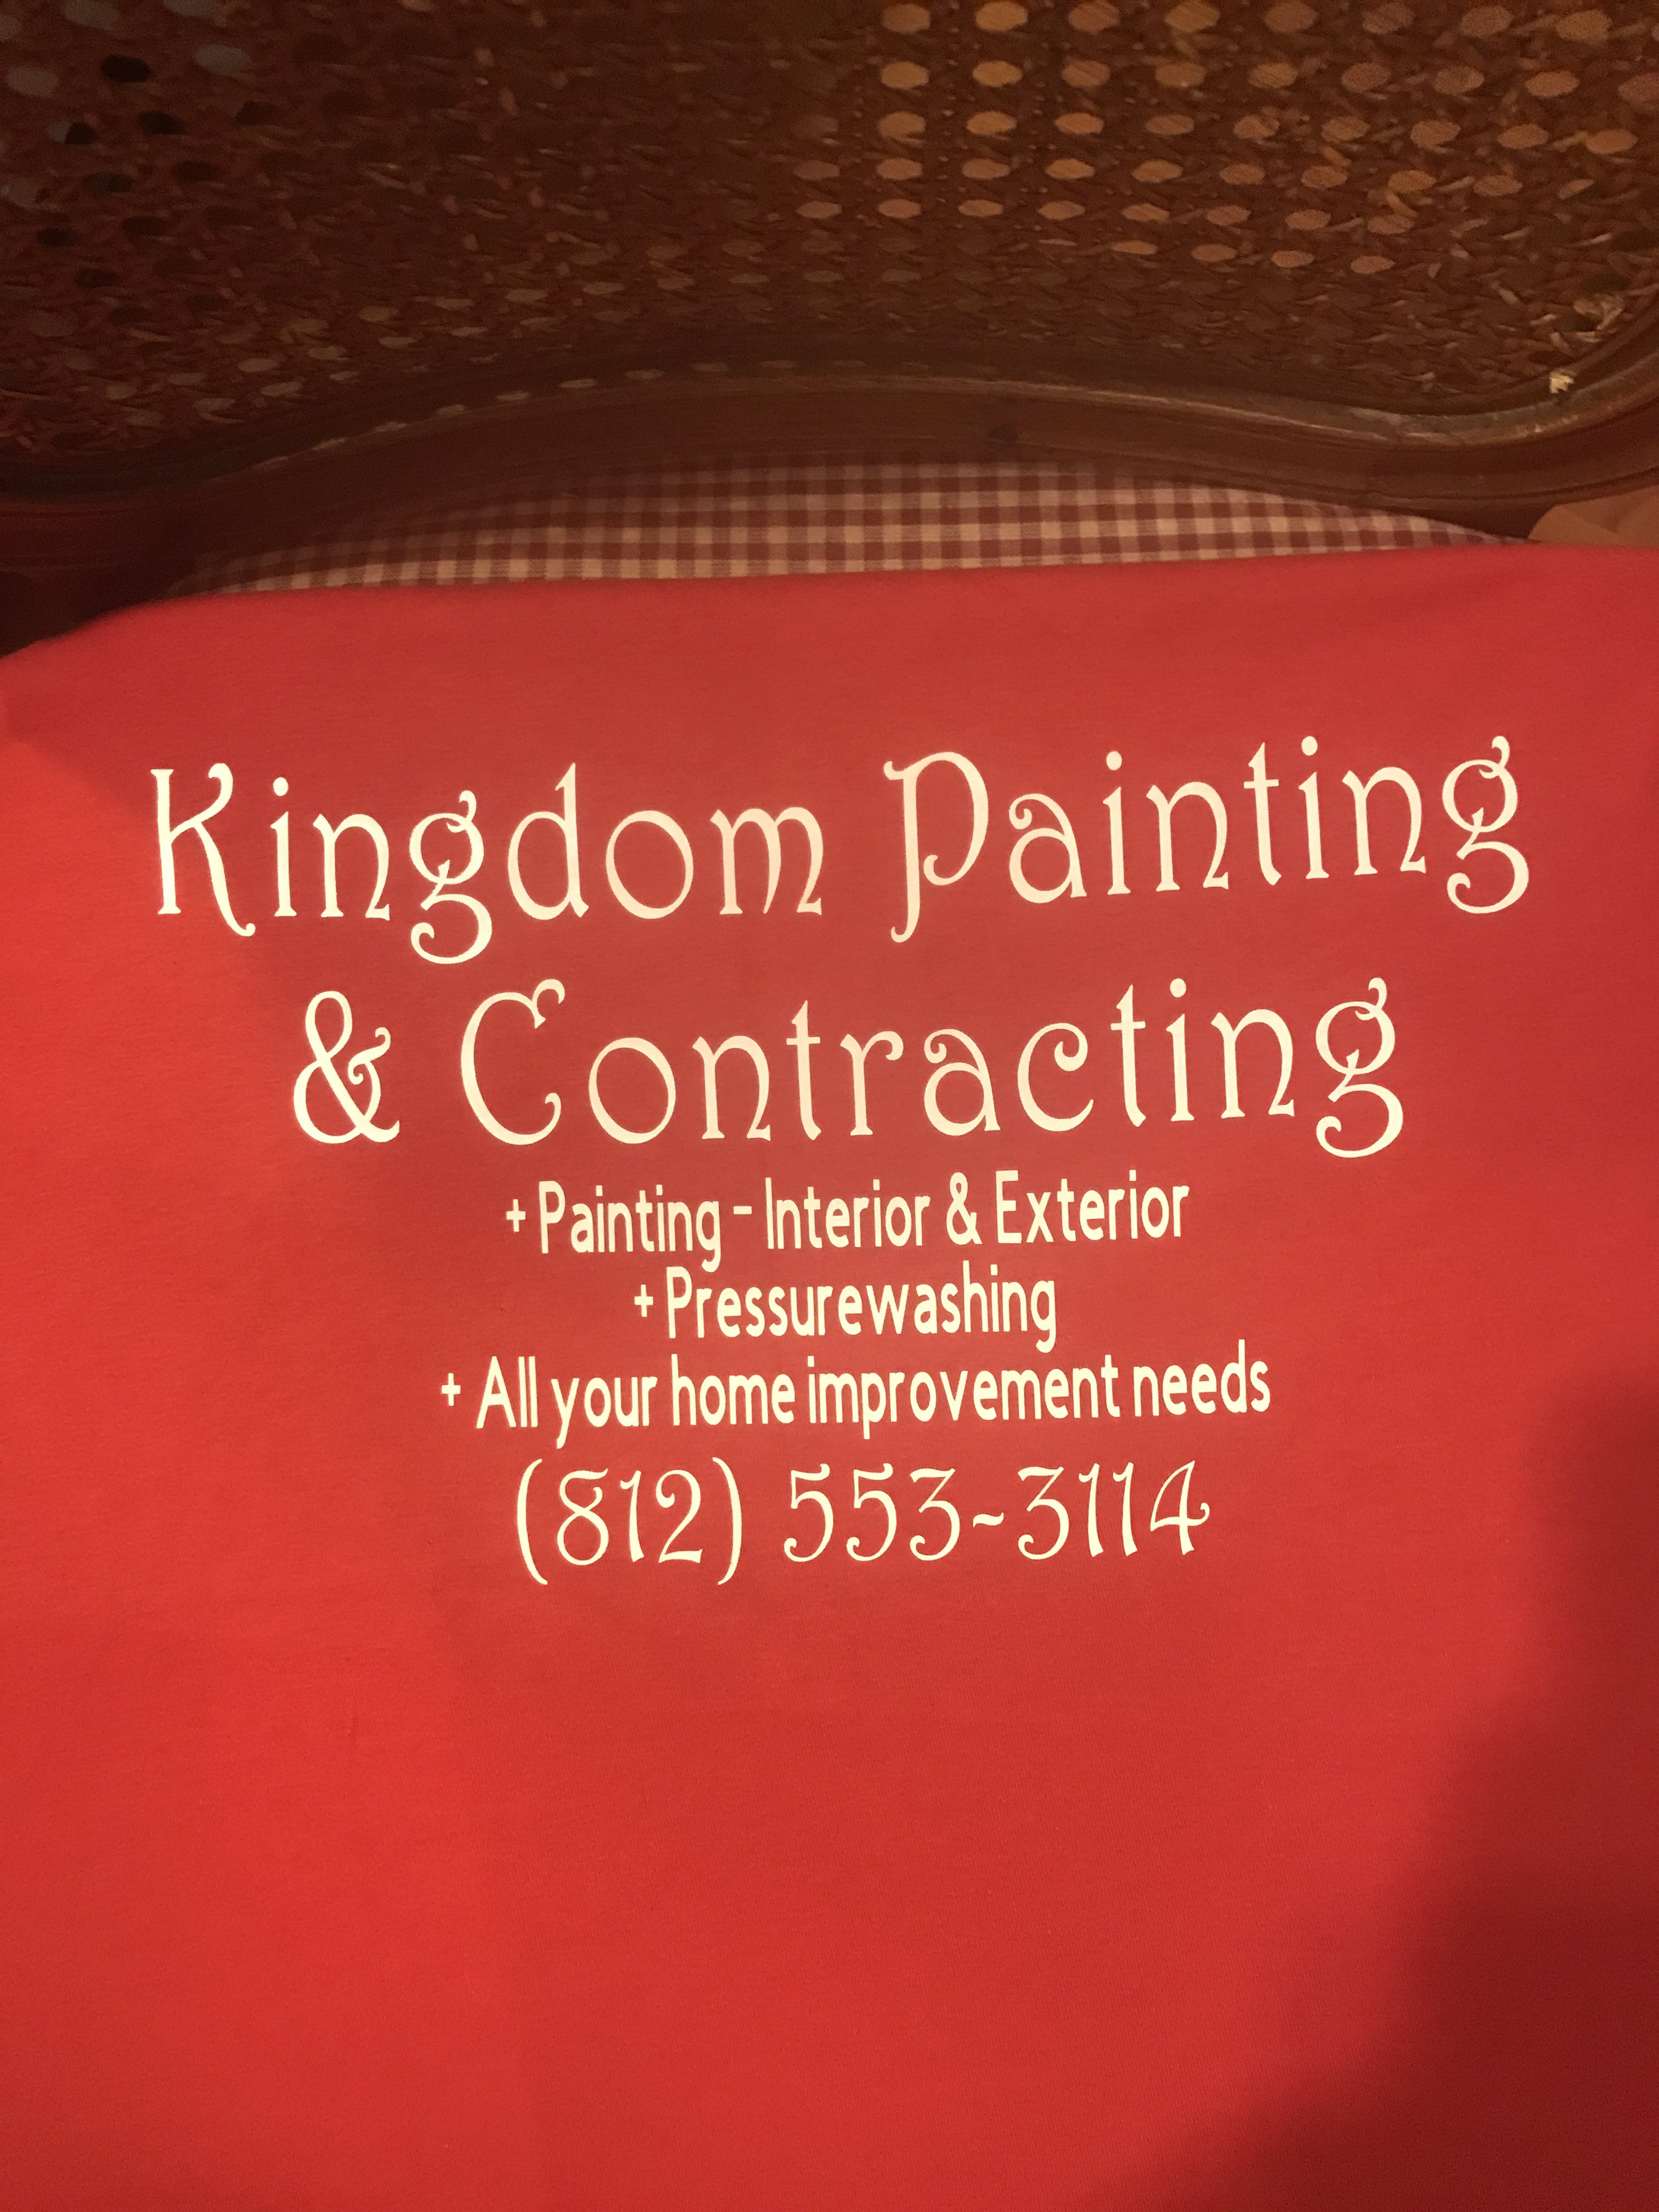 Kingdom Painting & Contracting